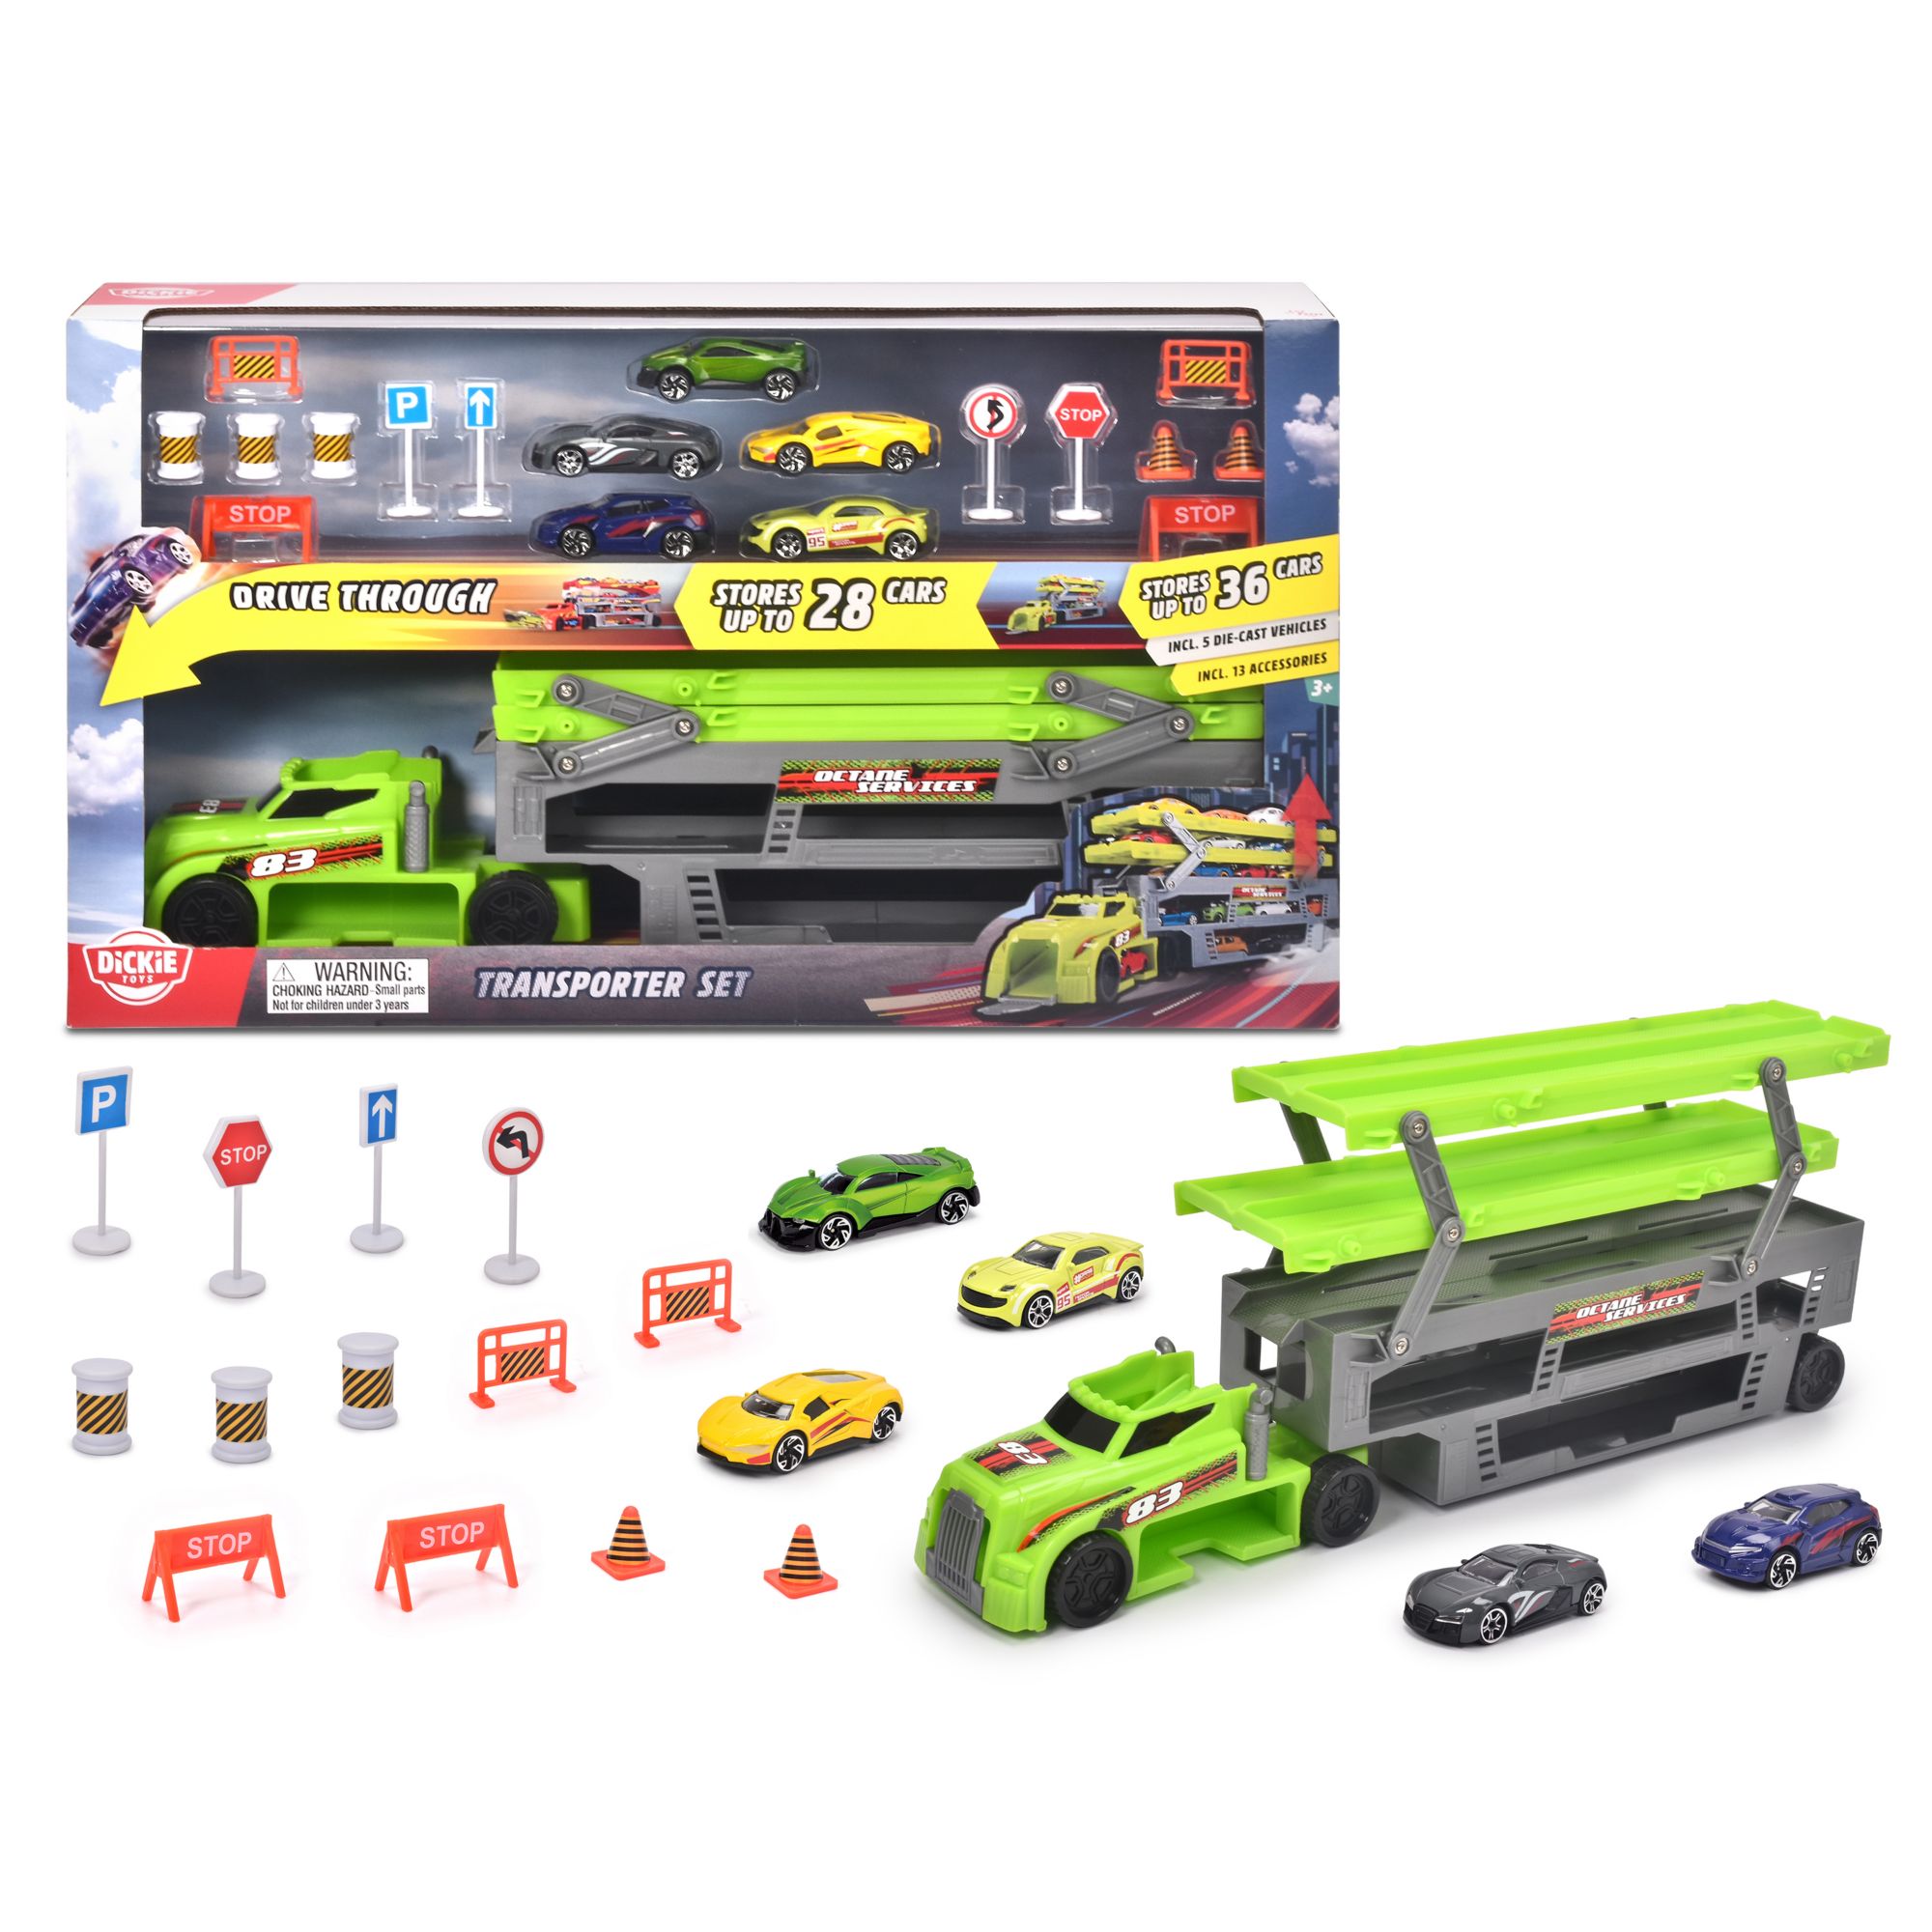 Dickie Toys Cars at